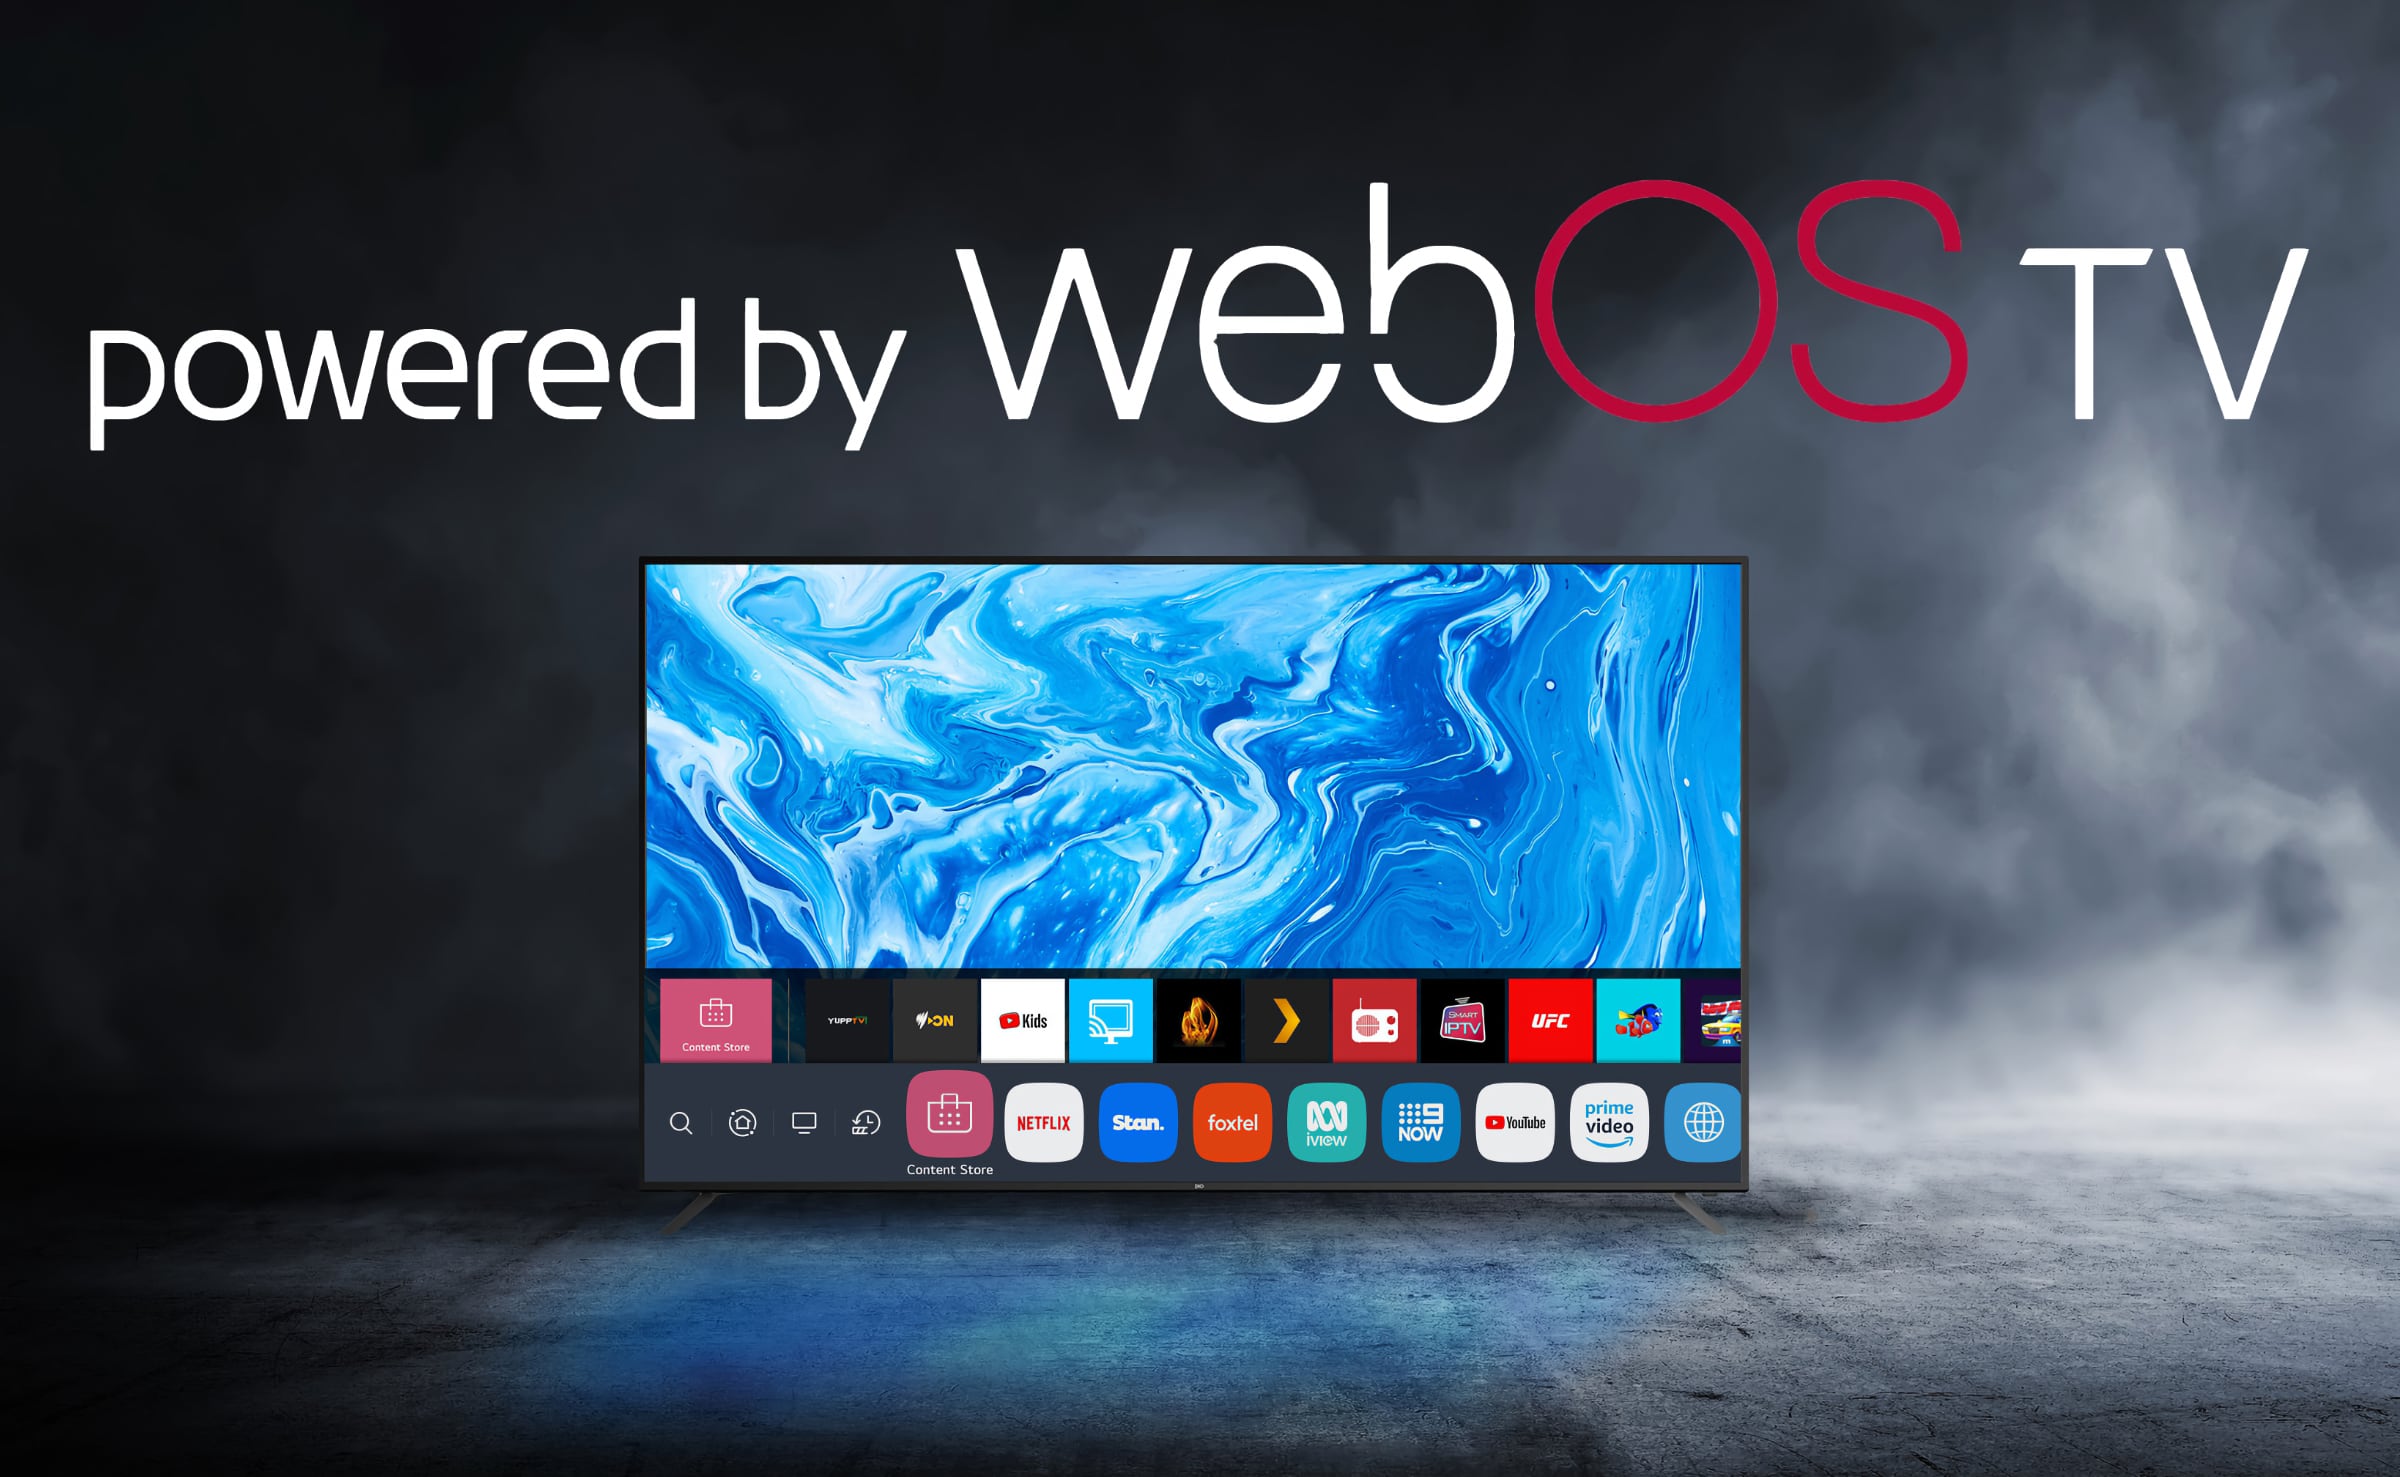 LG says that over 20 TV makers will be using its webOS platform -  FlatpanelsHD